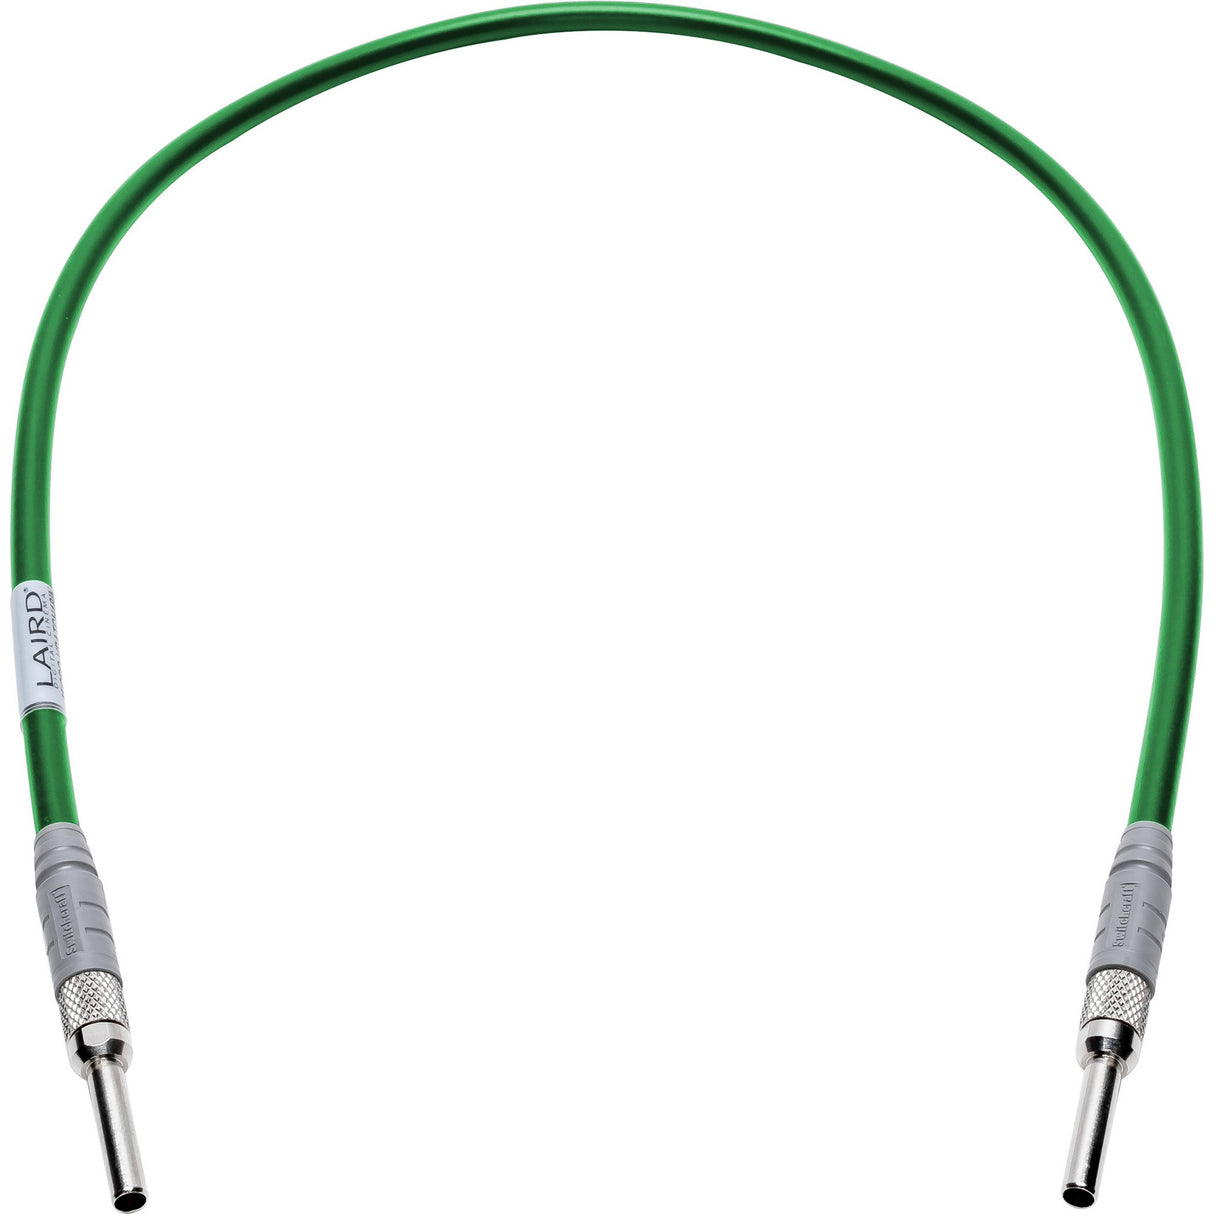 Laird MICRO-VPATCH-002GN 12G-SDI Micro Video Patch Cable, Military Green, 2-Feet